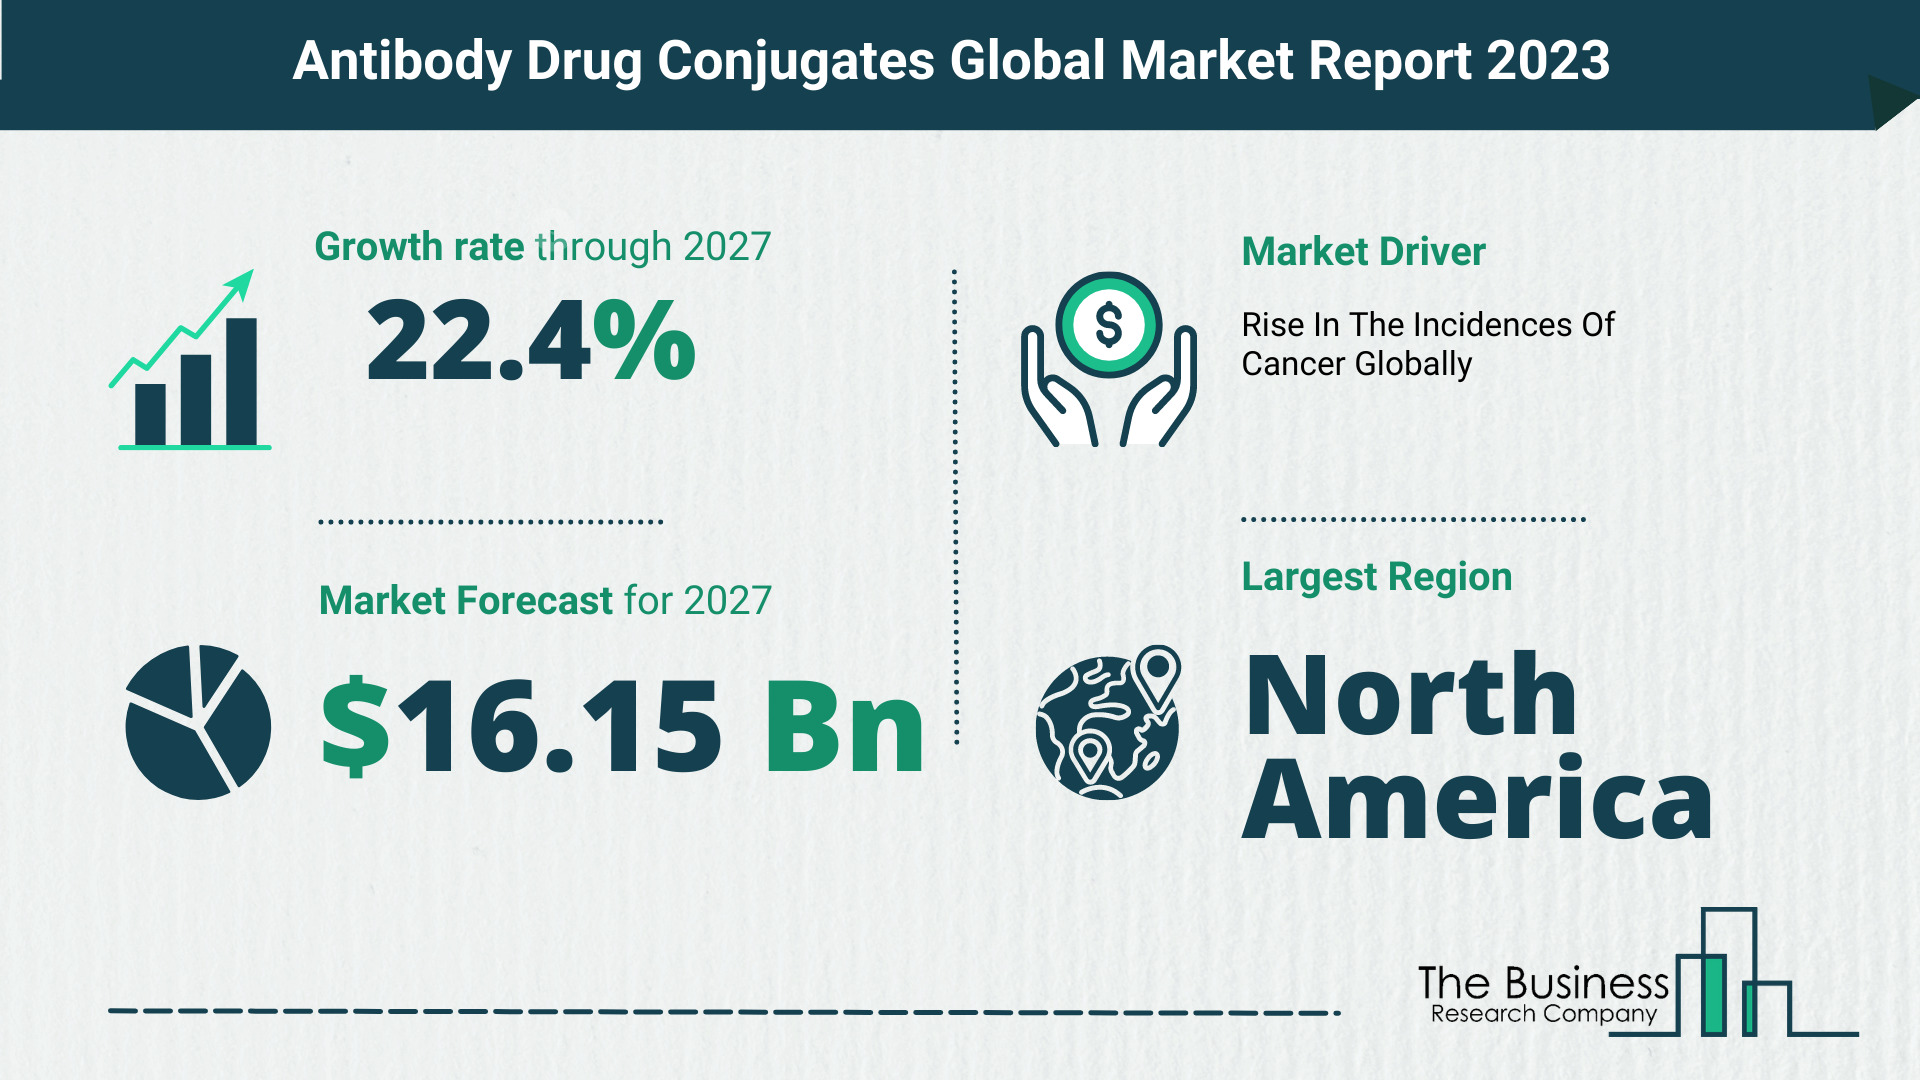 Antibody Drug Conjugates Market Overview: Market Size, Drivers And Trends